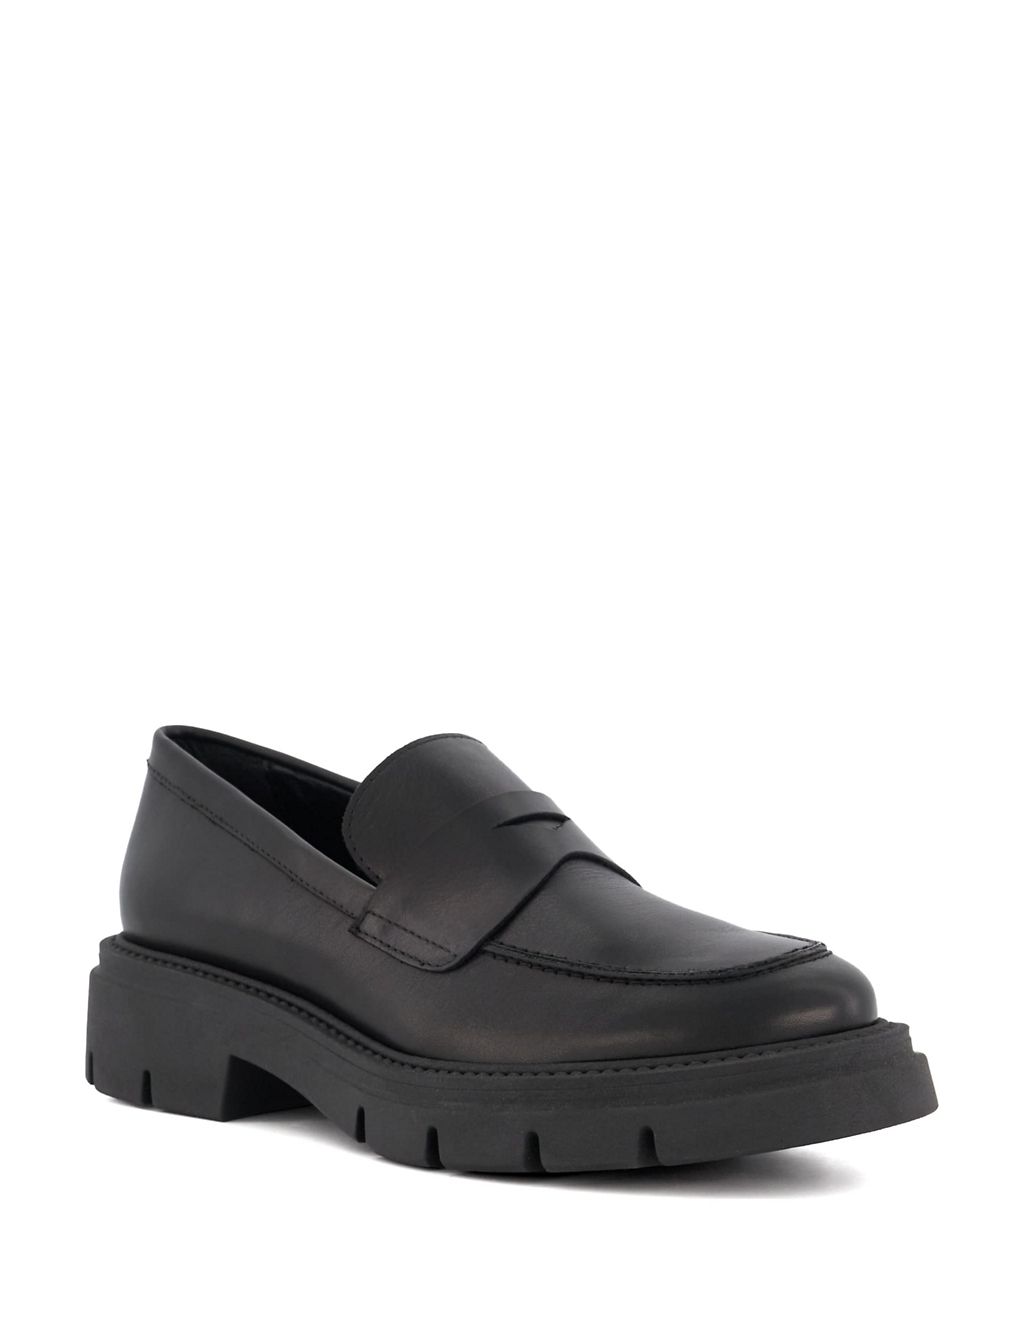 Leather Chunky Flat Loafers | Dune London | M&S